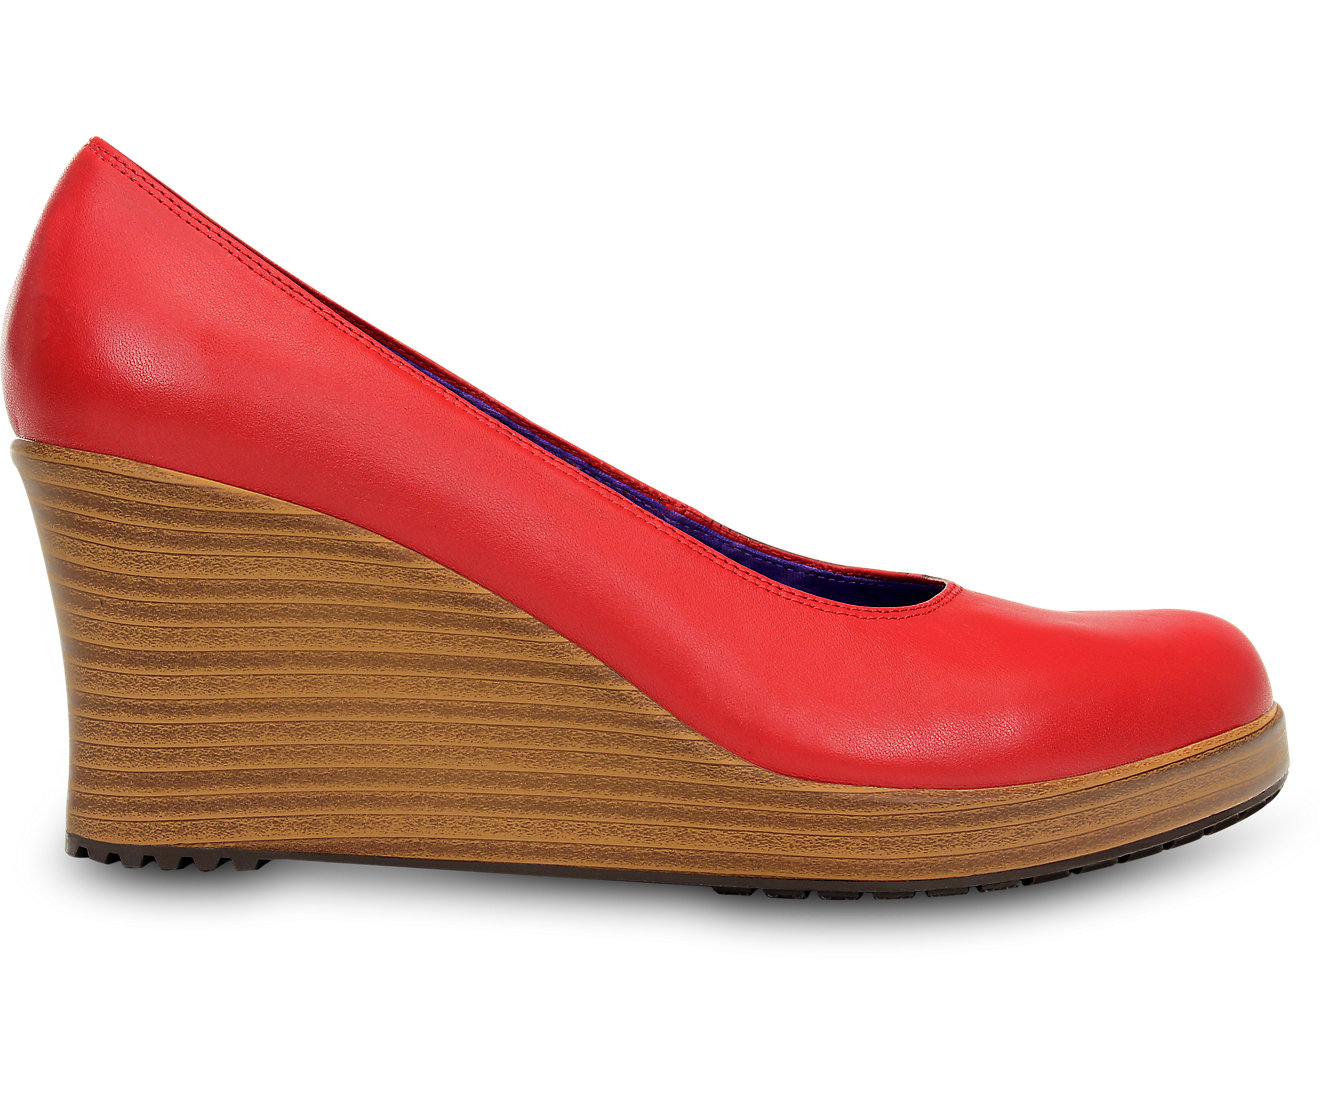 Women’s A-leigh Closed-toe Wedge